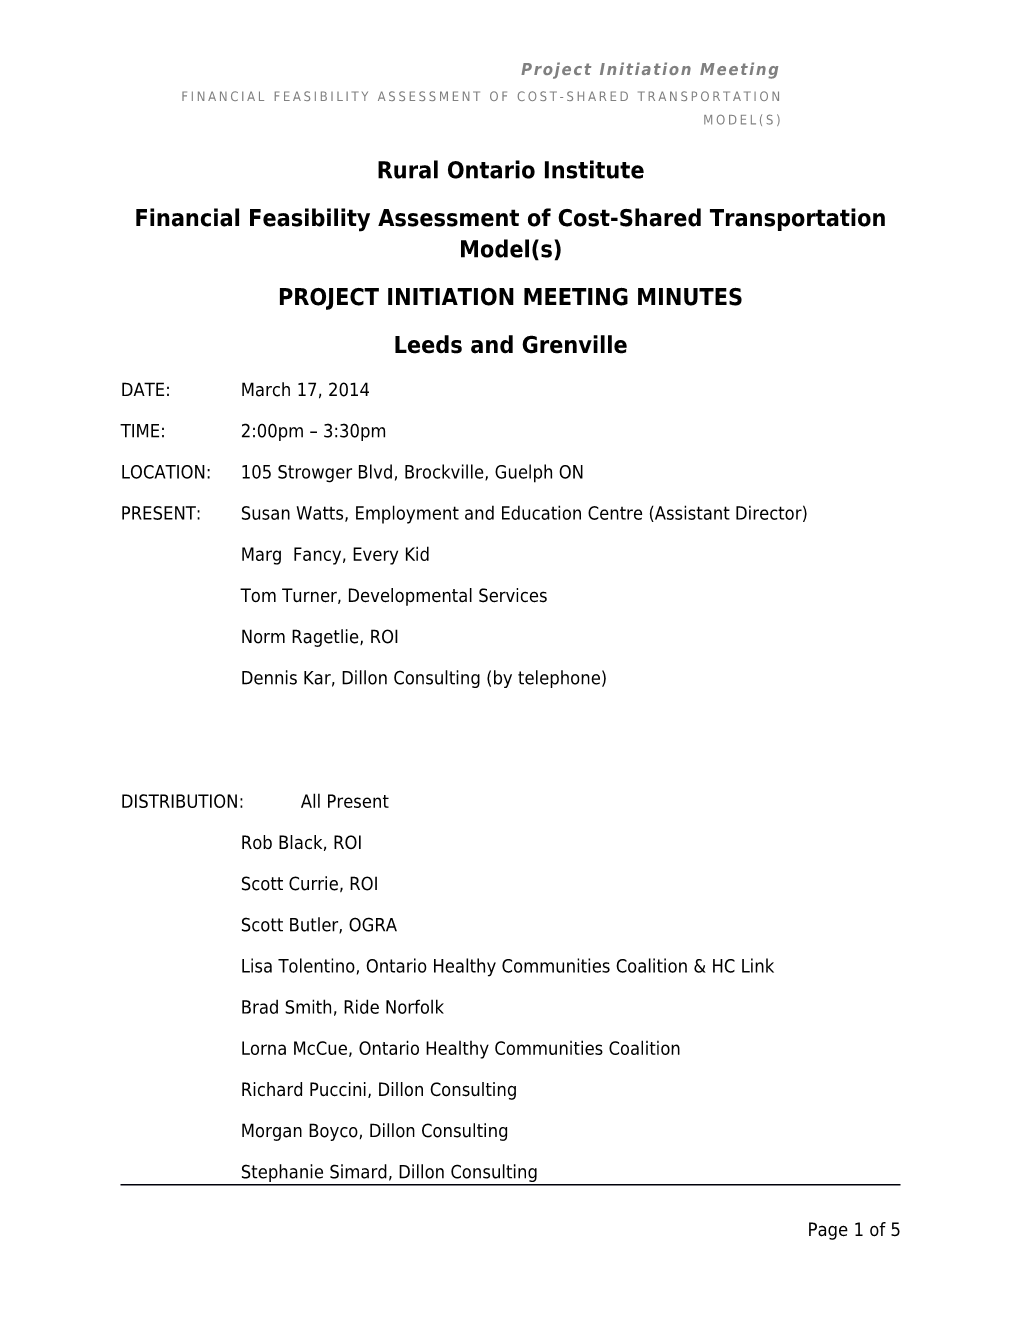 Financial Feasibility Assessment of Cost-Shared Transportation Model(S)